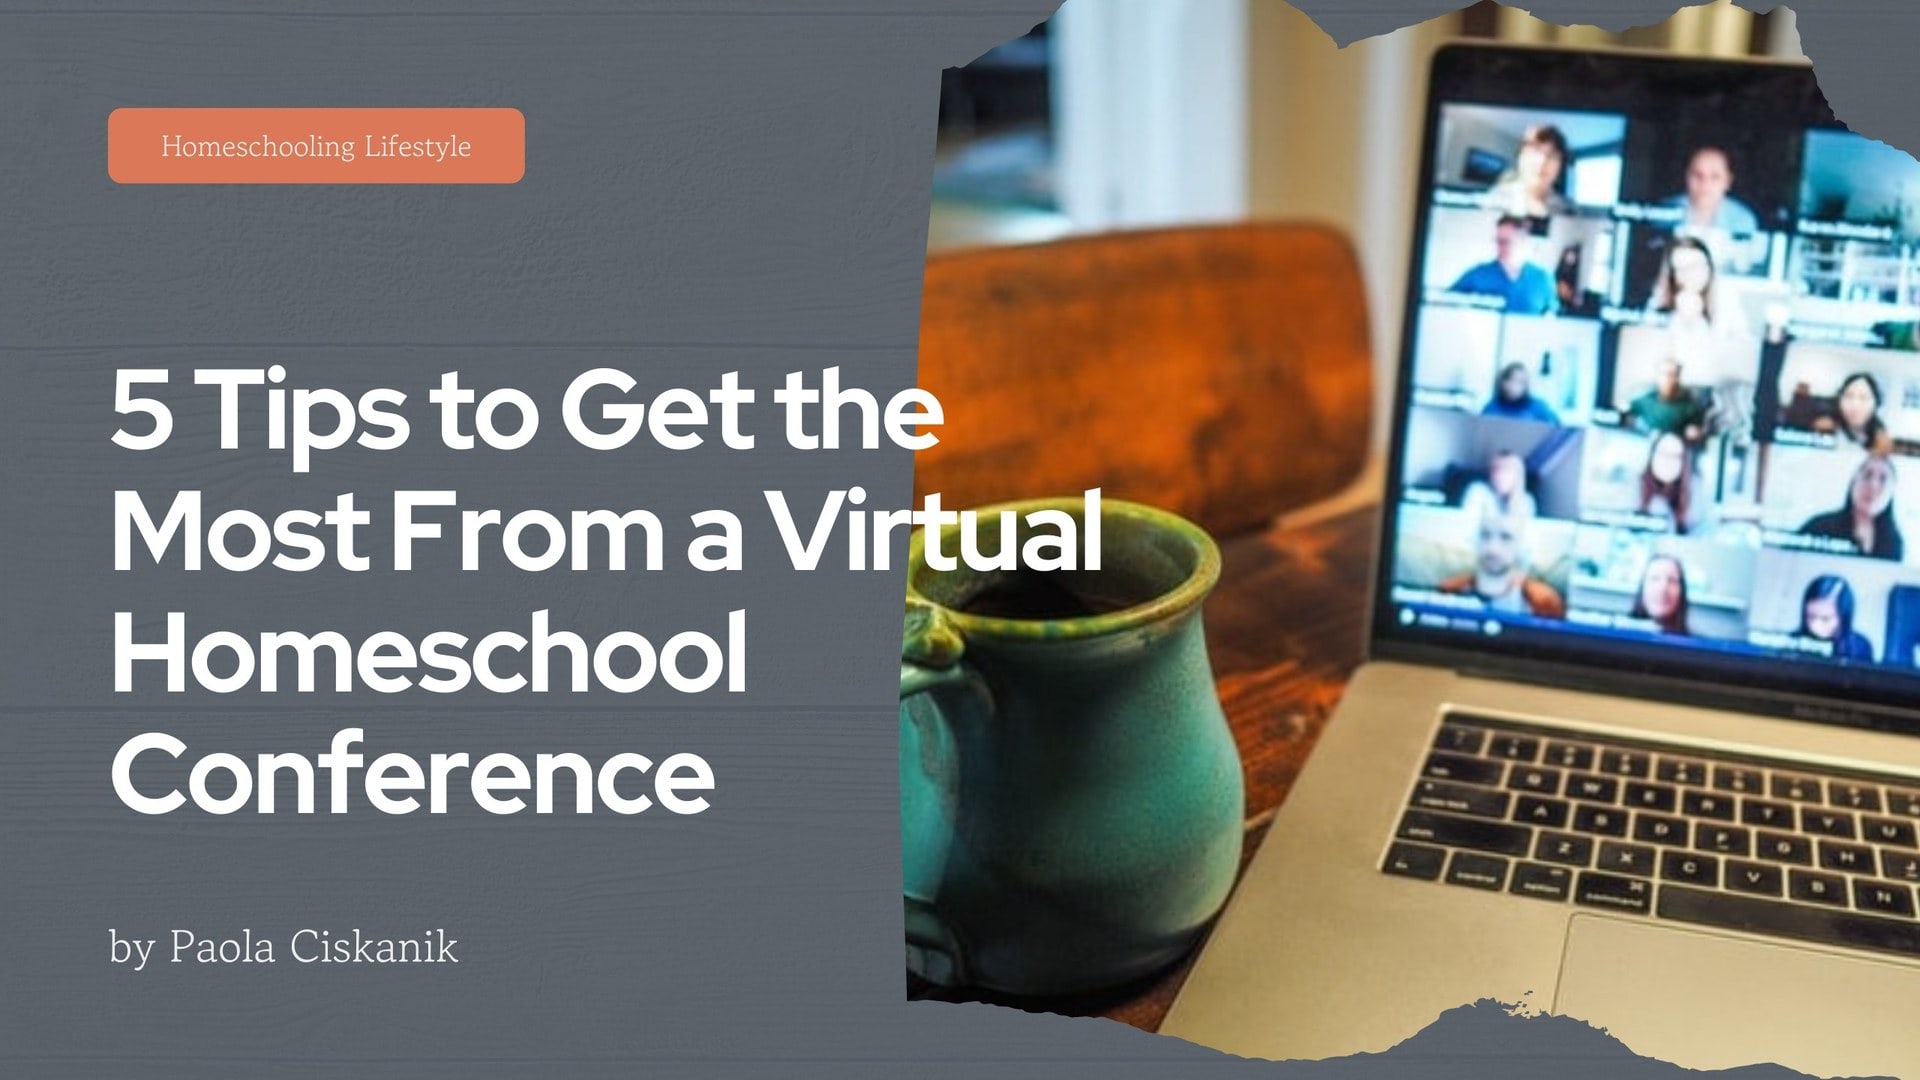 5 Tips to Get the Most From a Virtual Homeschool Conference